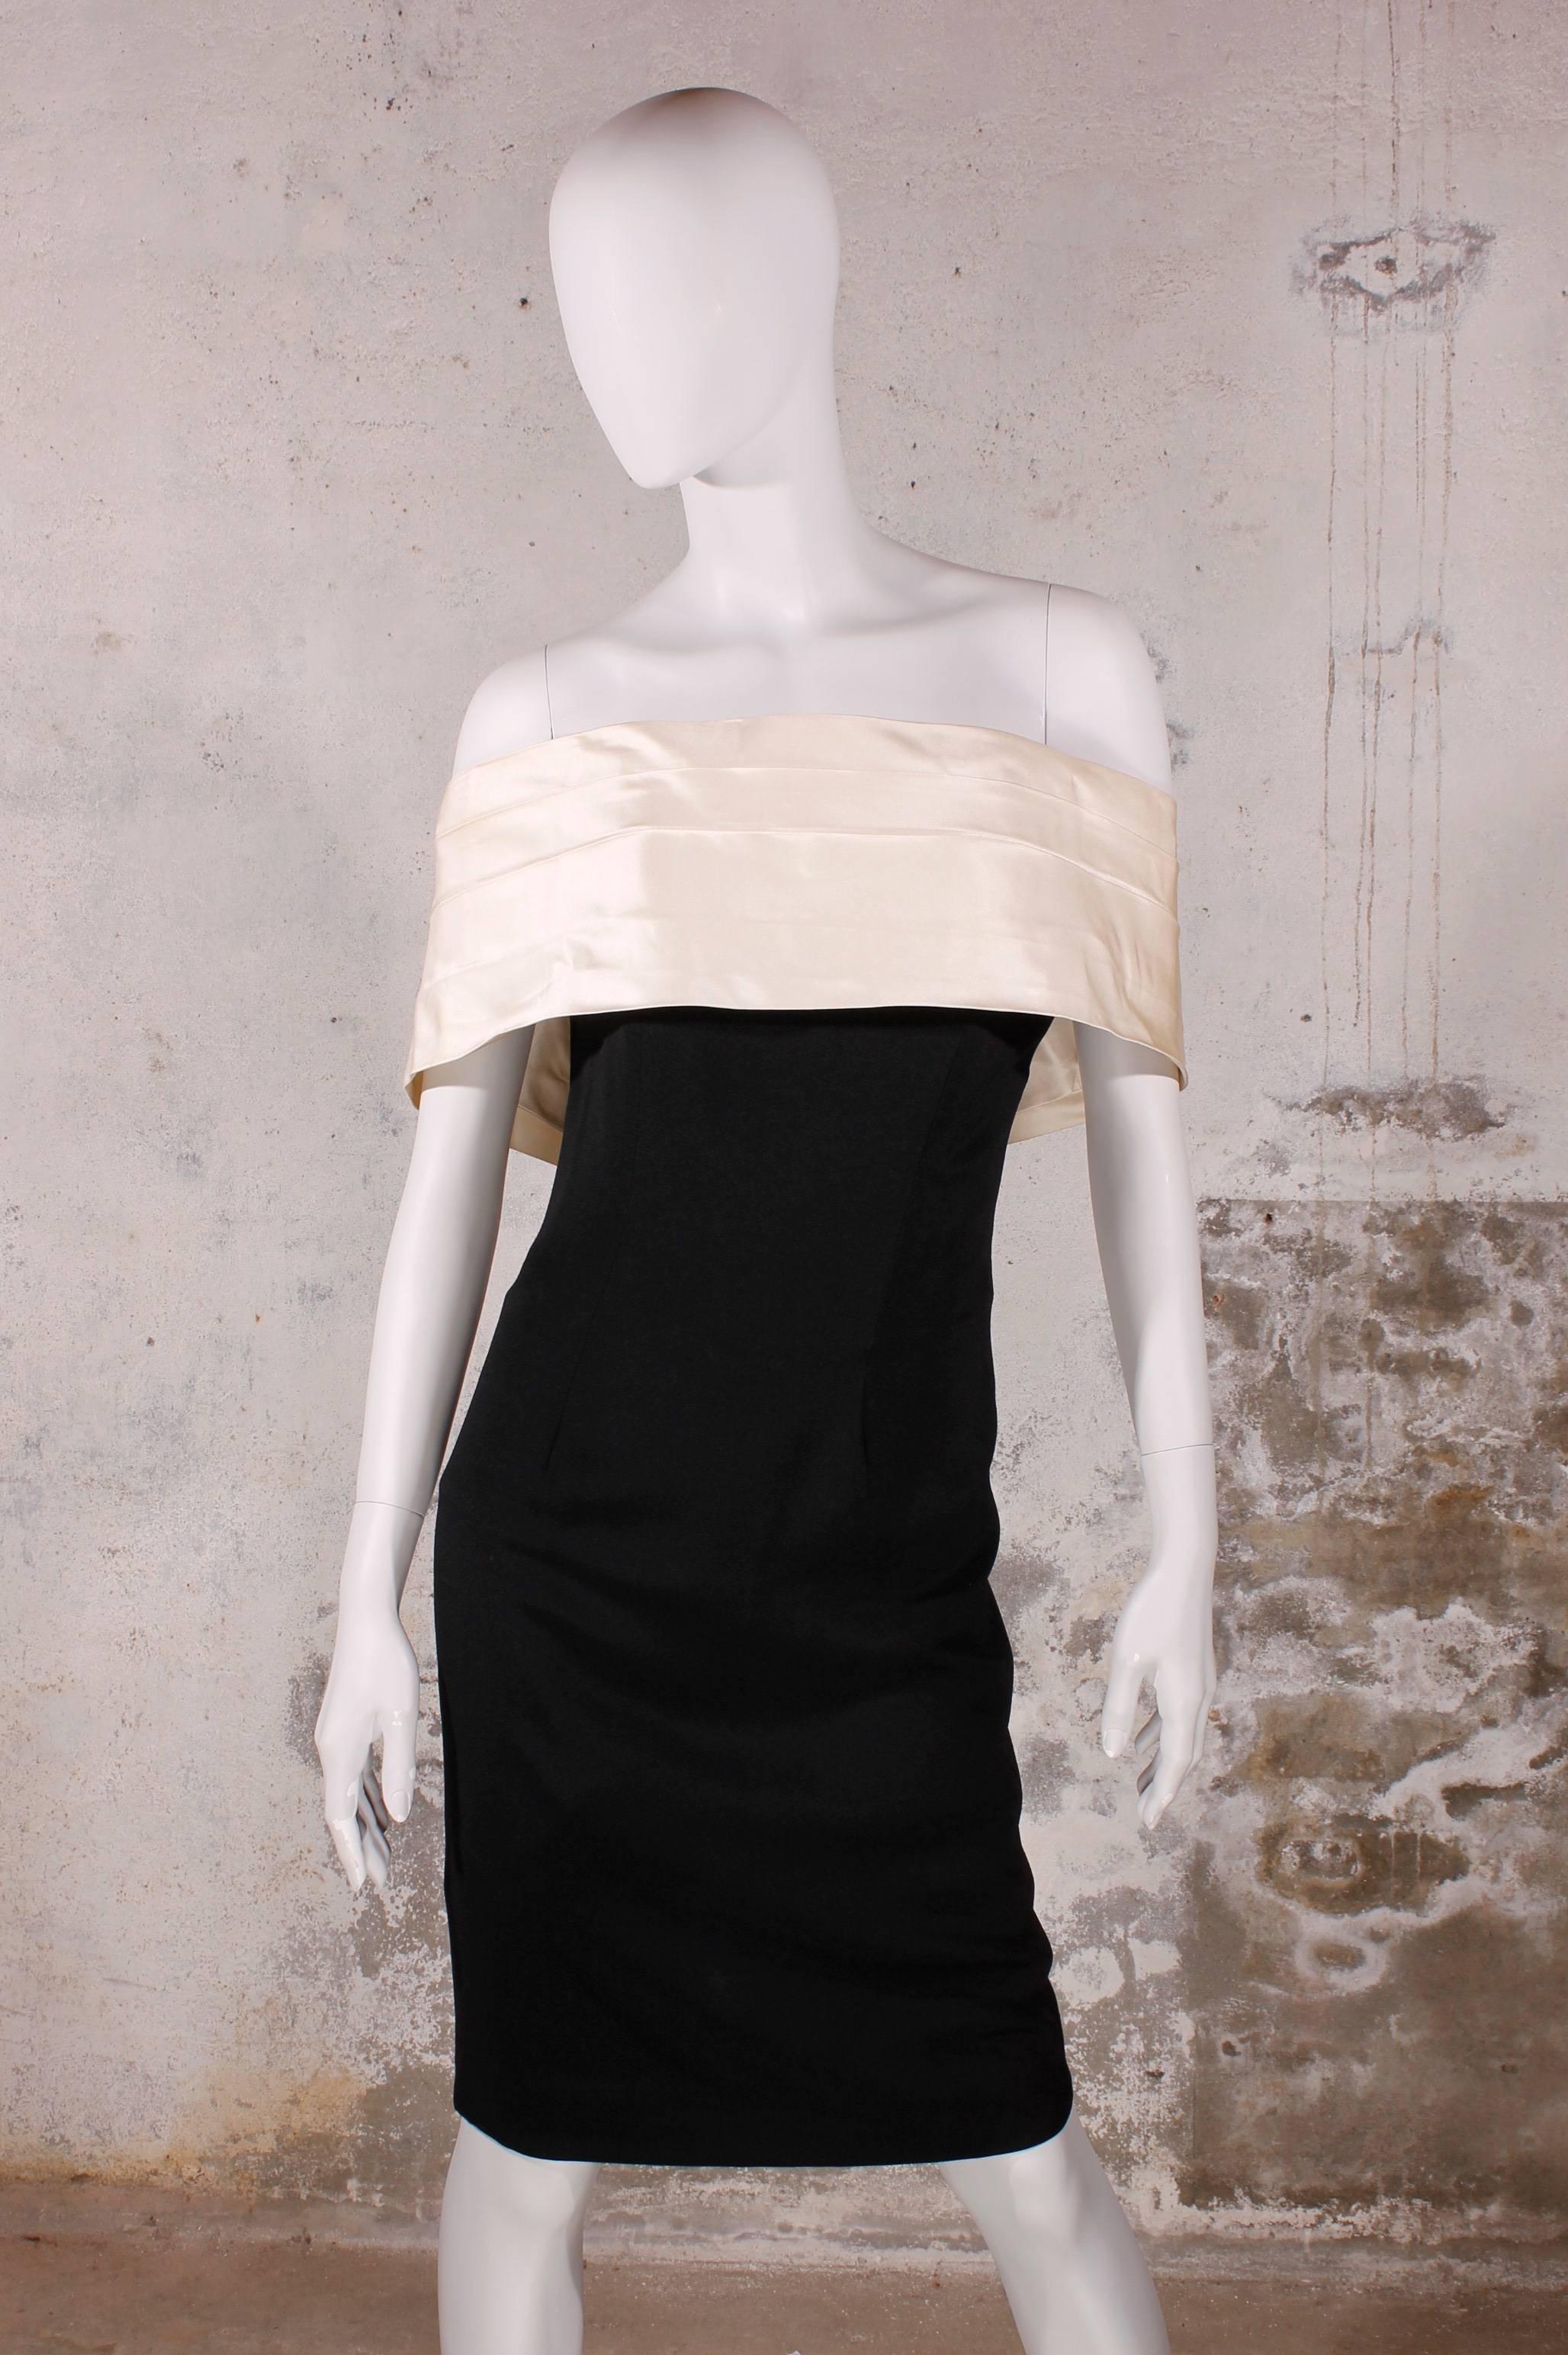 The dream of every designer vintage lover! A Christian Dior Avant Garde Tuxedo cocktaildress straight from the eighties.
A white layered silk collar compliments this off-the-shoulder dress which has a low cut on the back. The white collar becomes a